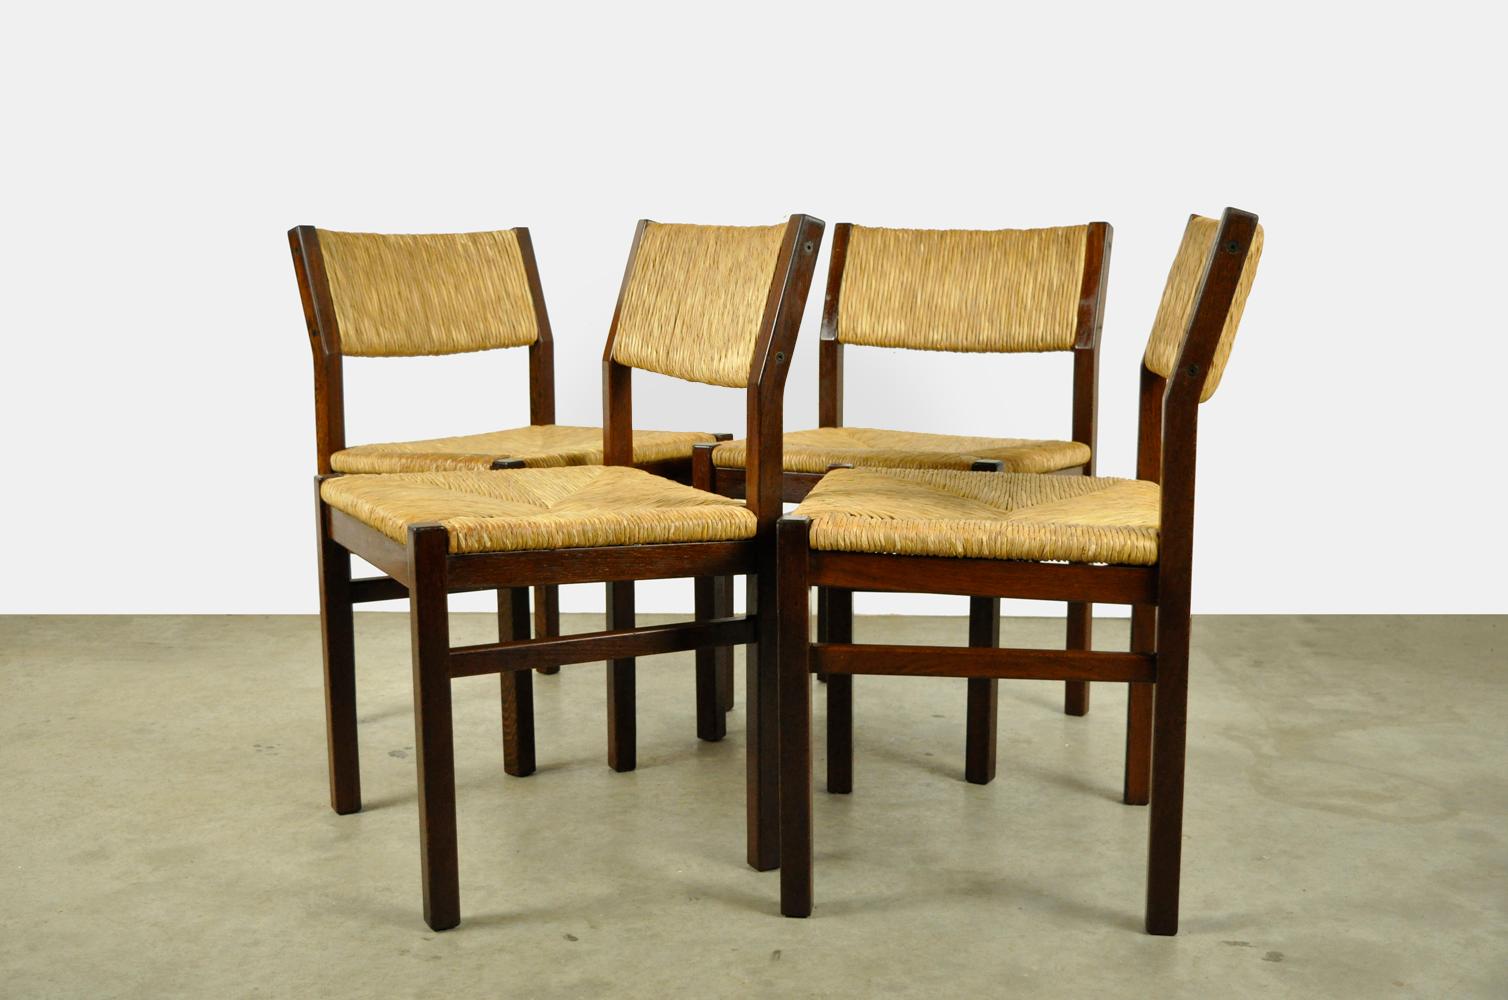 Dutch Set of 4 vintage dining chairs with reed seat by Pastoe, 1970s Netherlands For Sale